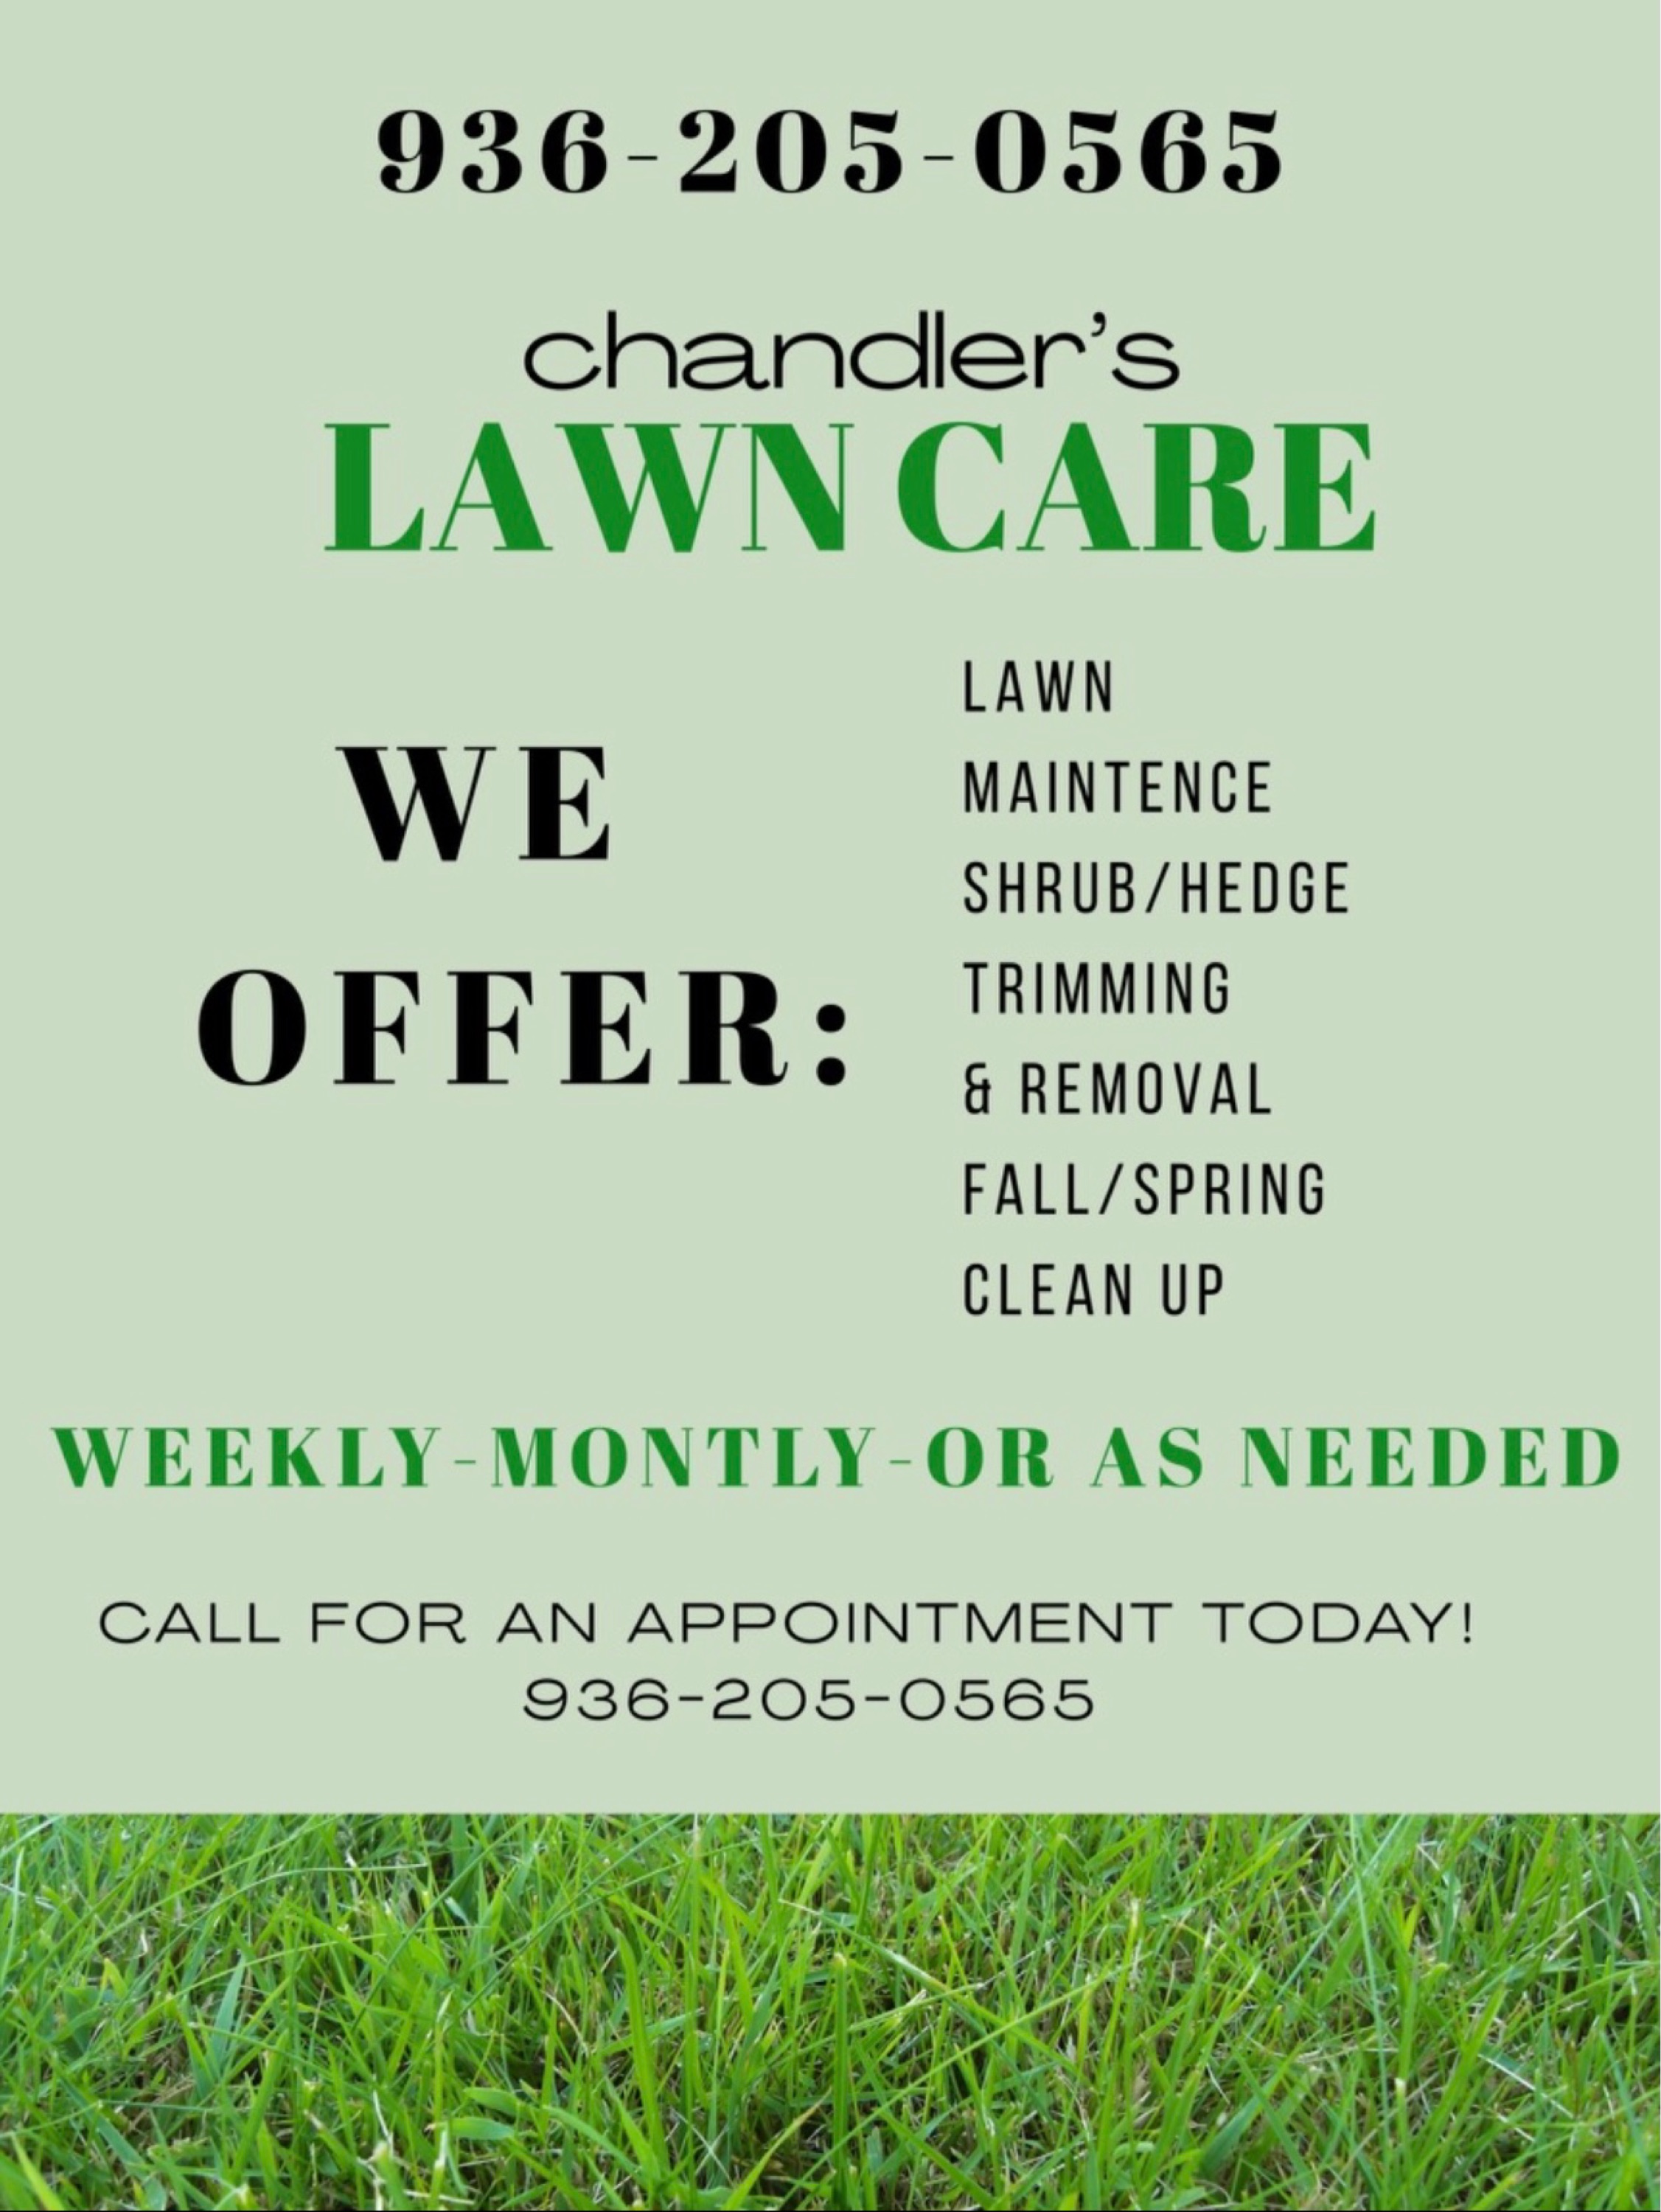 Chandler's Lawn Care Logo